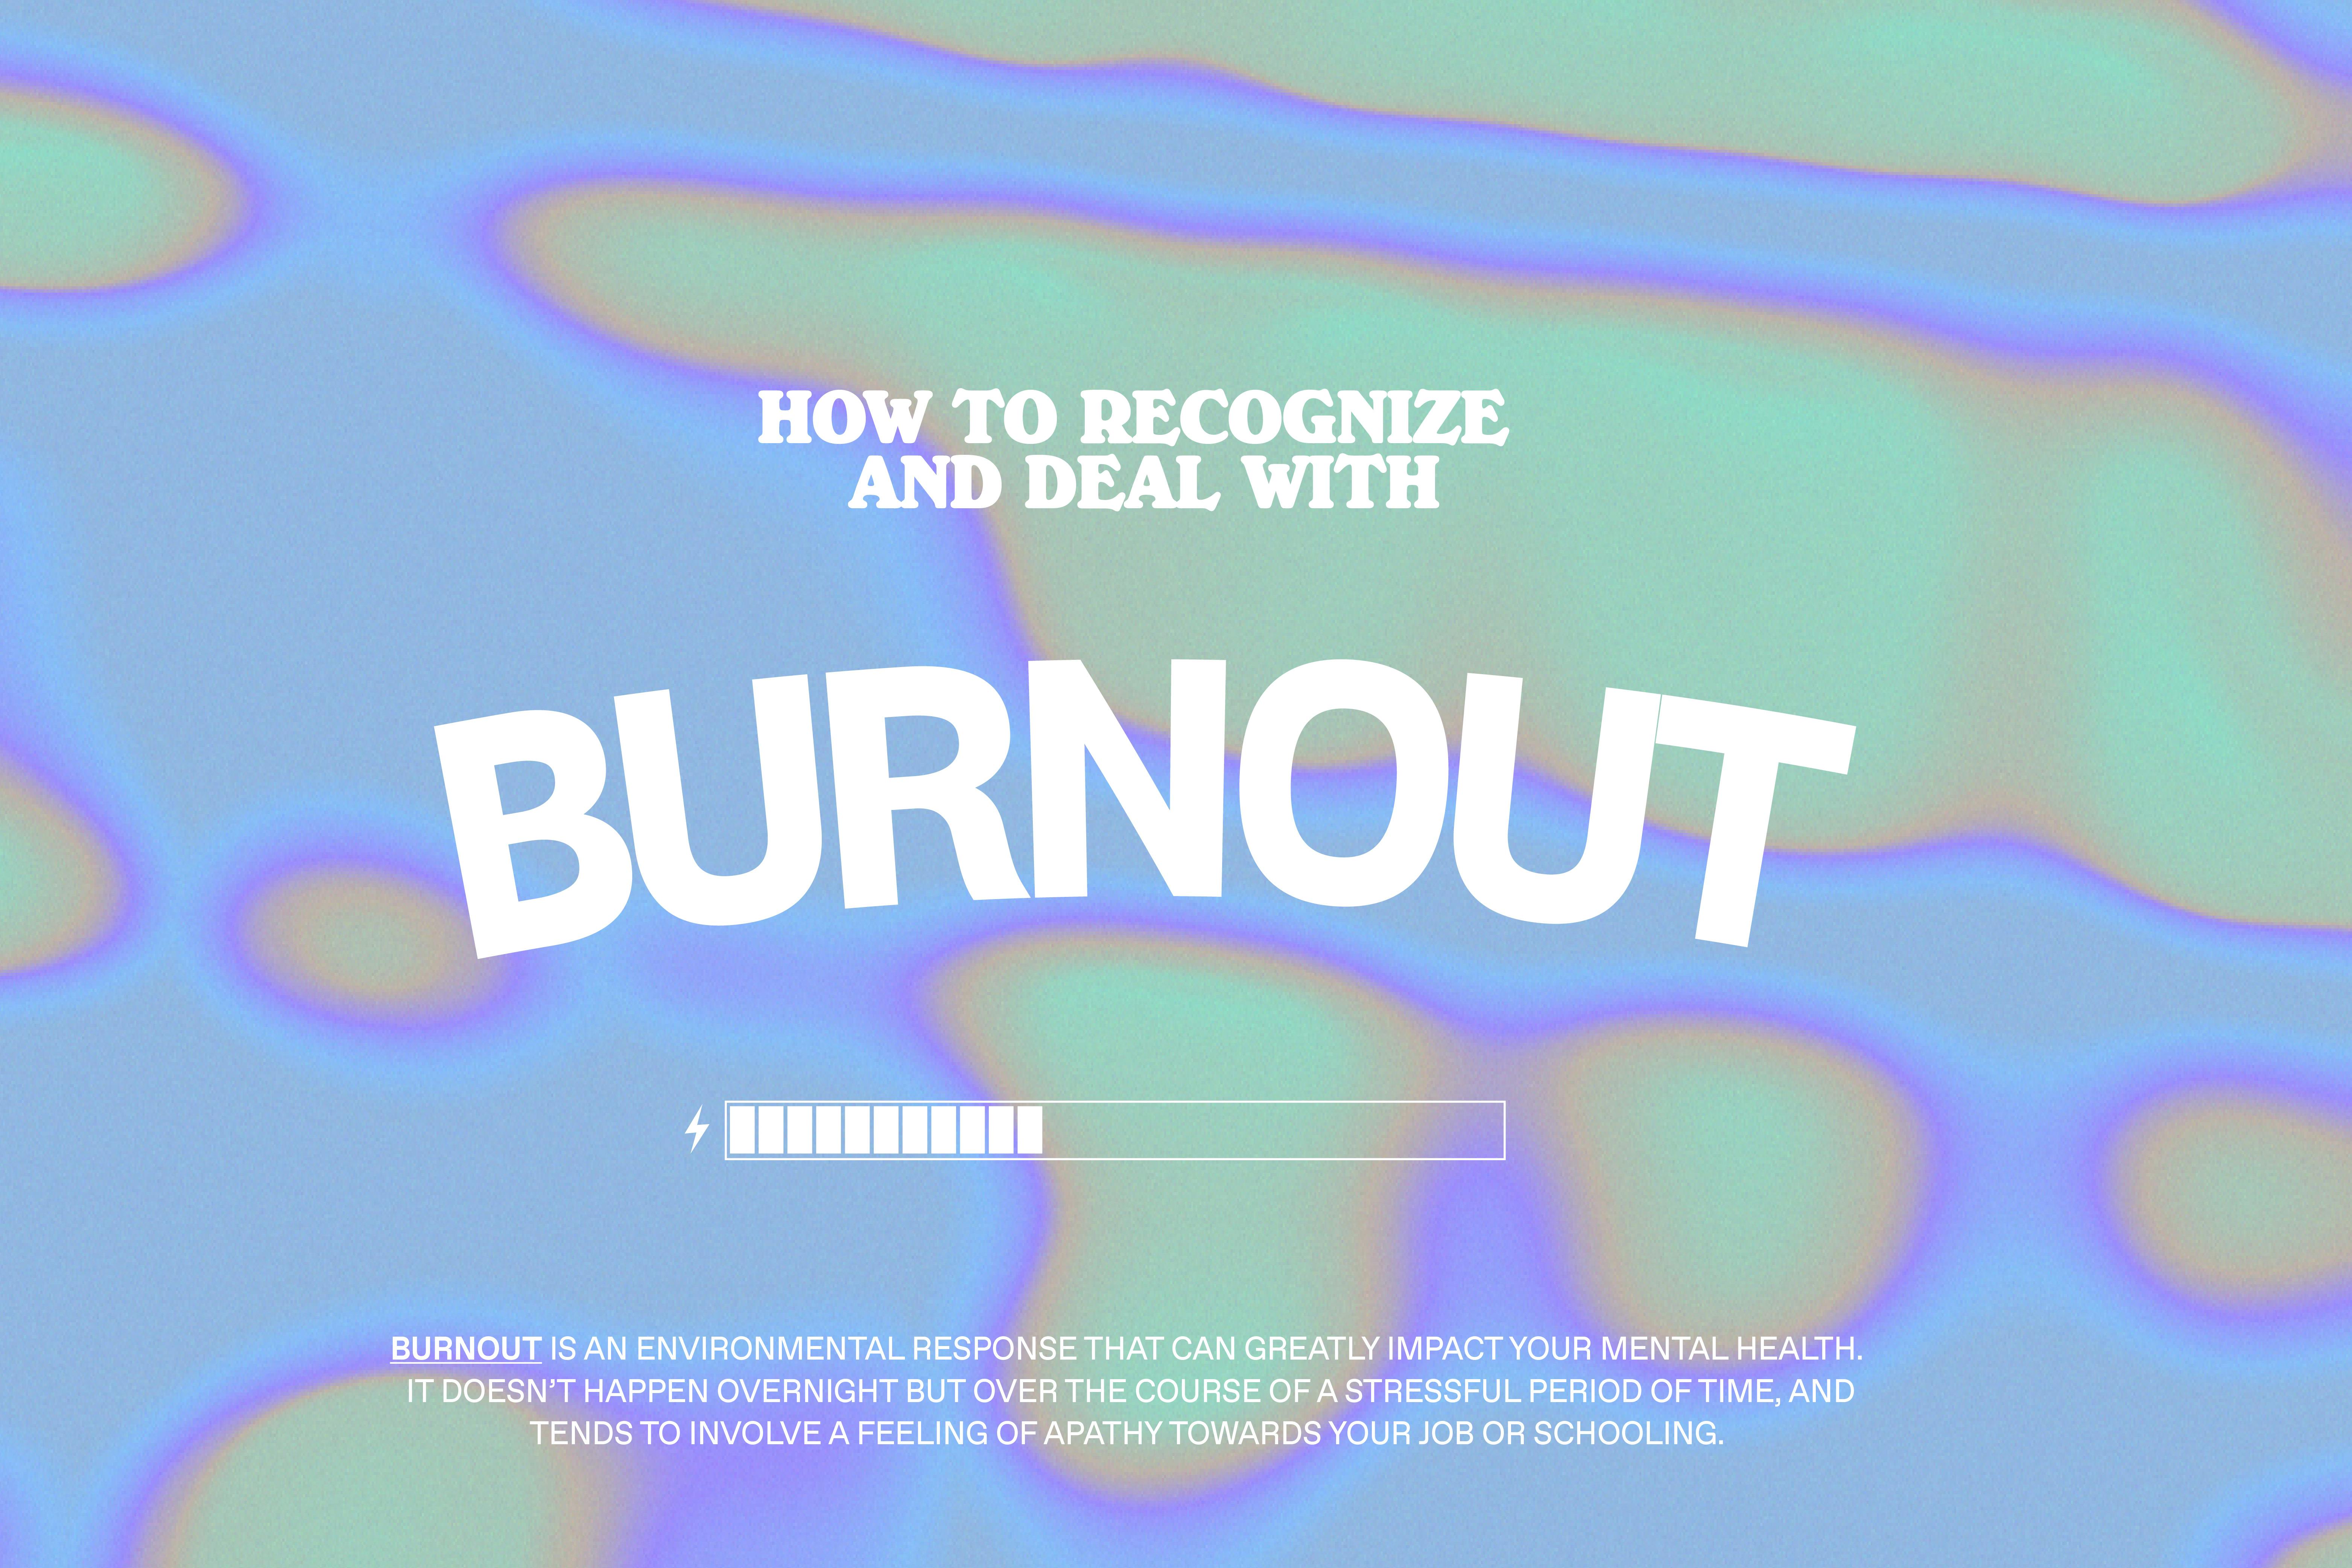 How to Recognize and Deal with Burnout